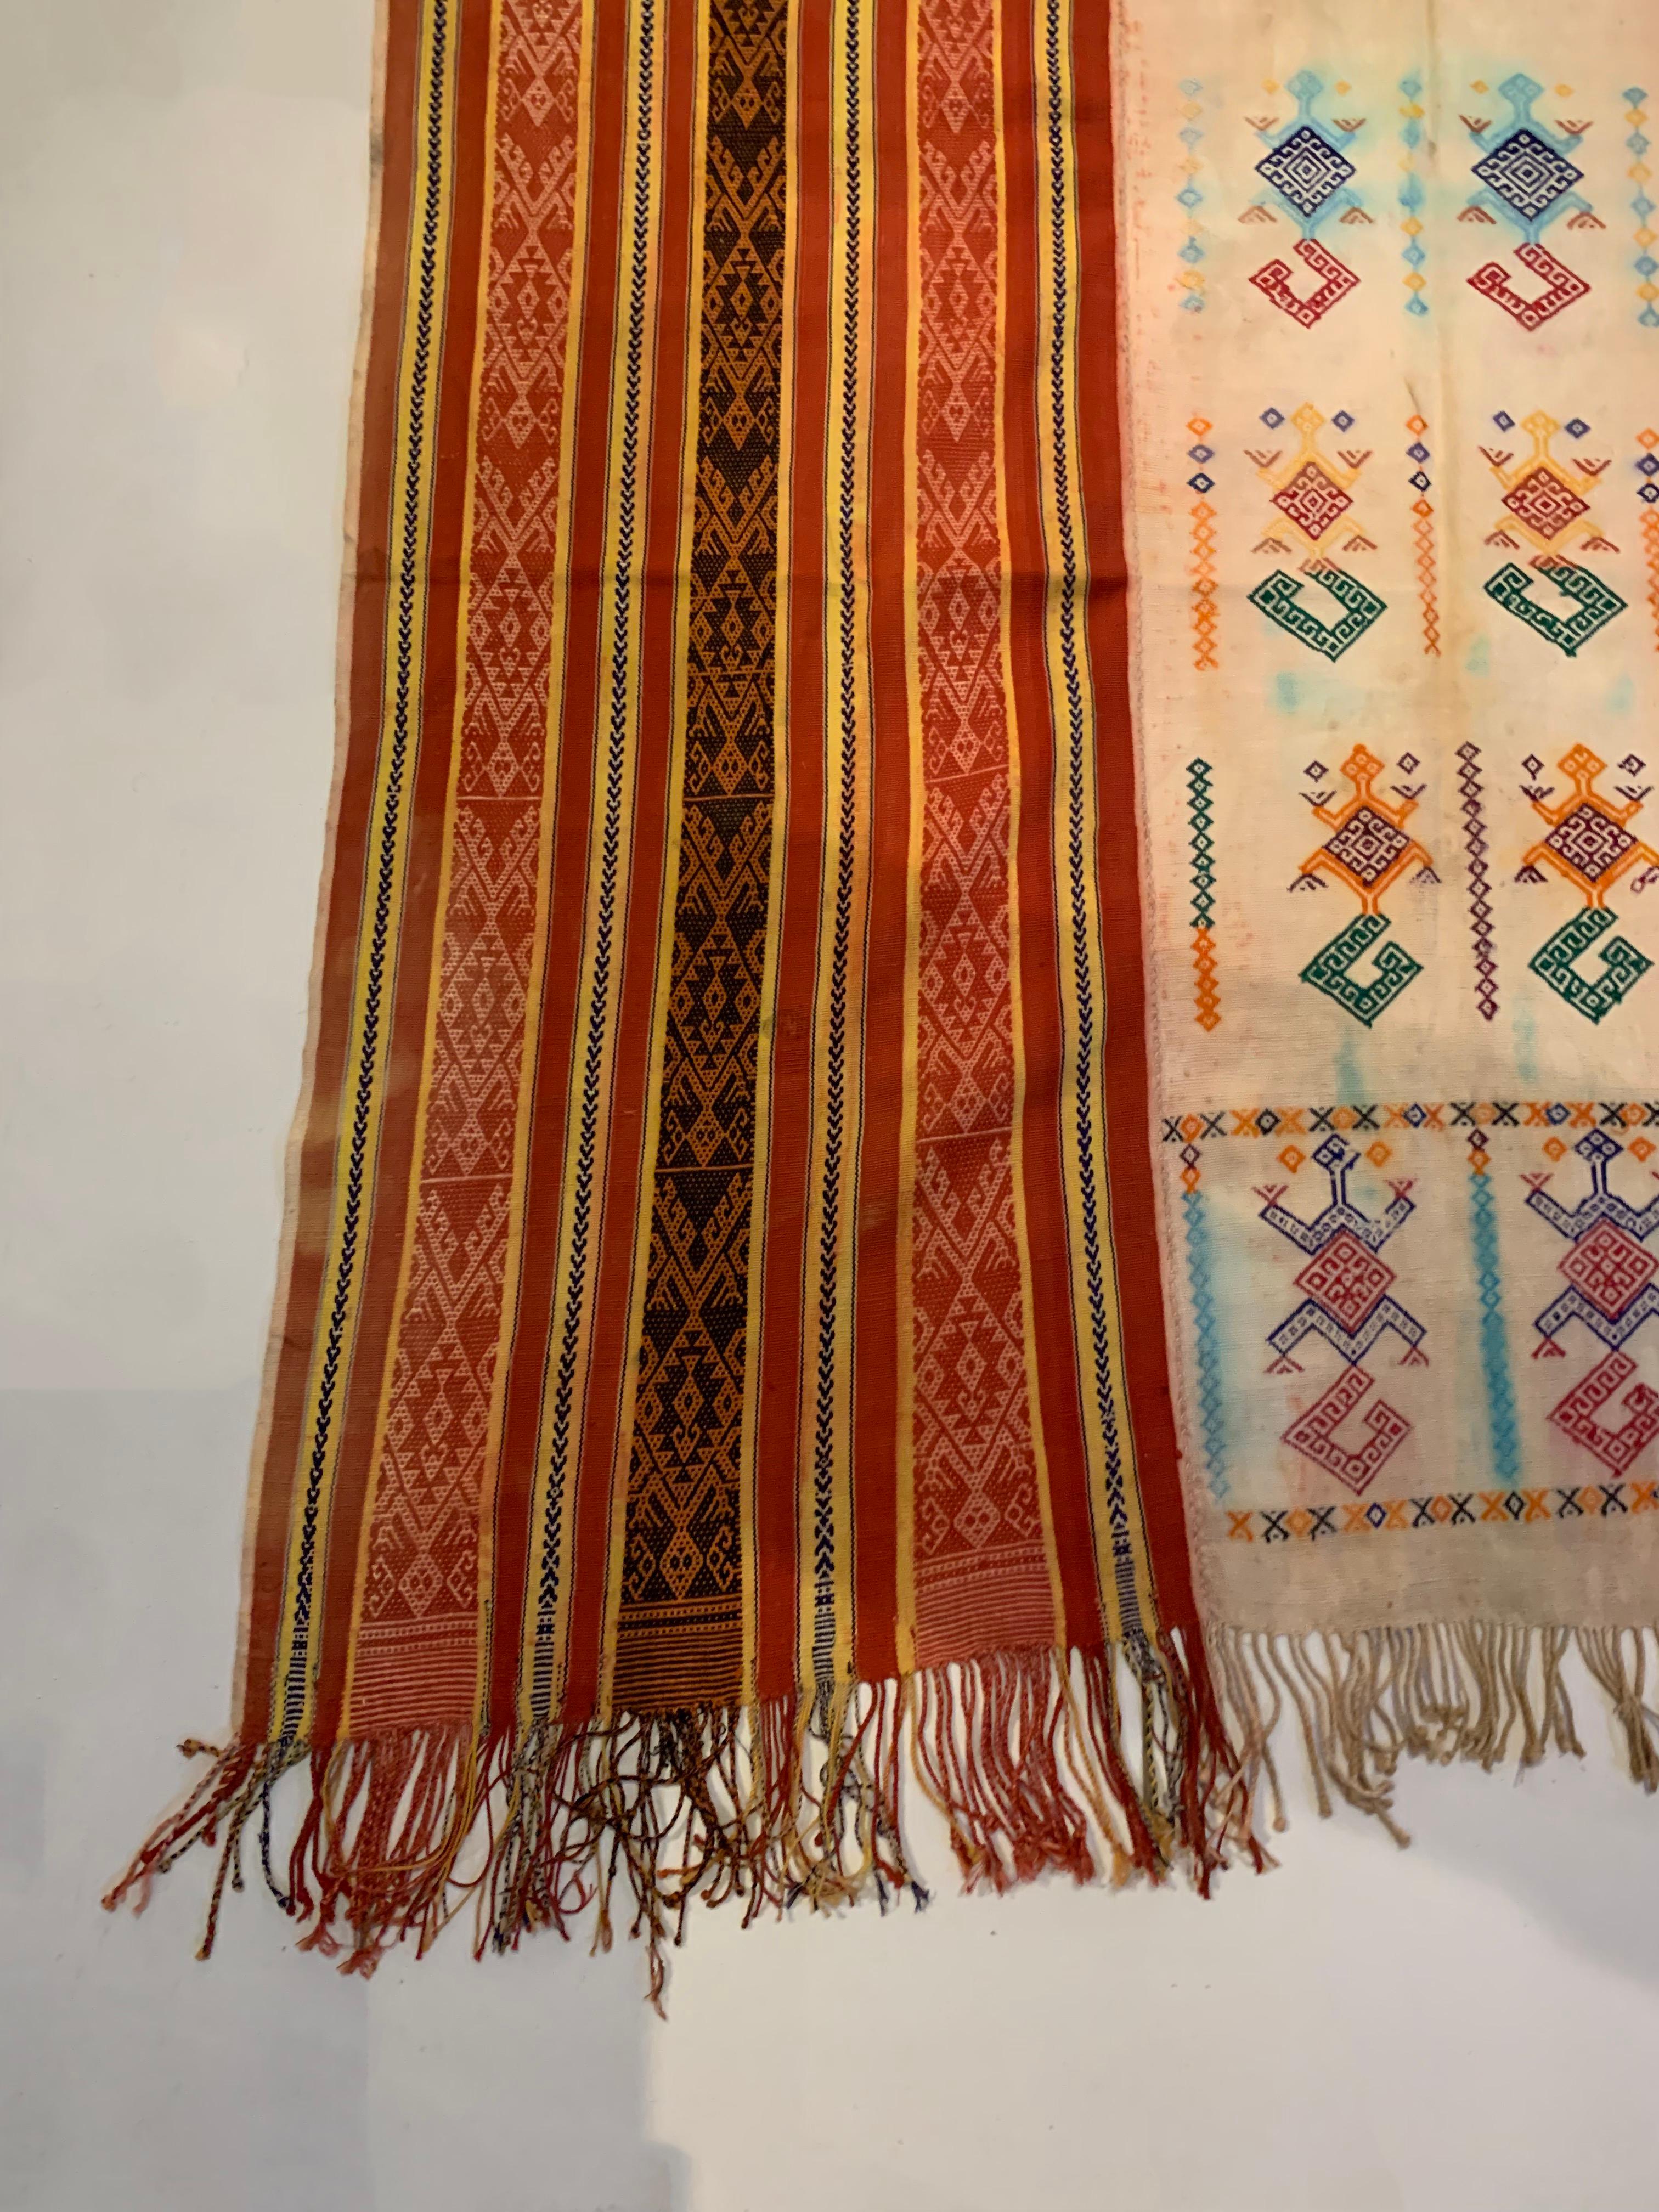 Indonesian Ikat Textile from Timor Stunning Tribal Motifs & Colors, Indonesia c. 1950 For Sale